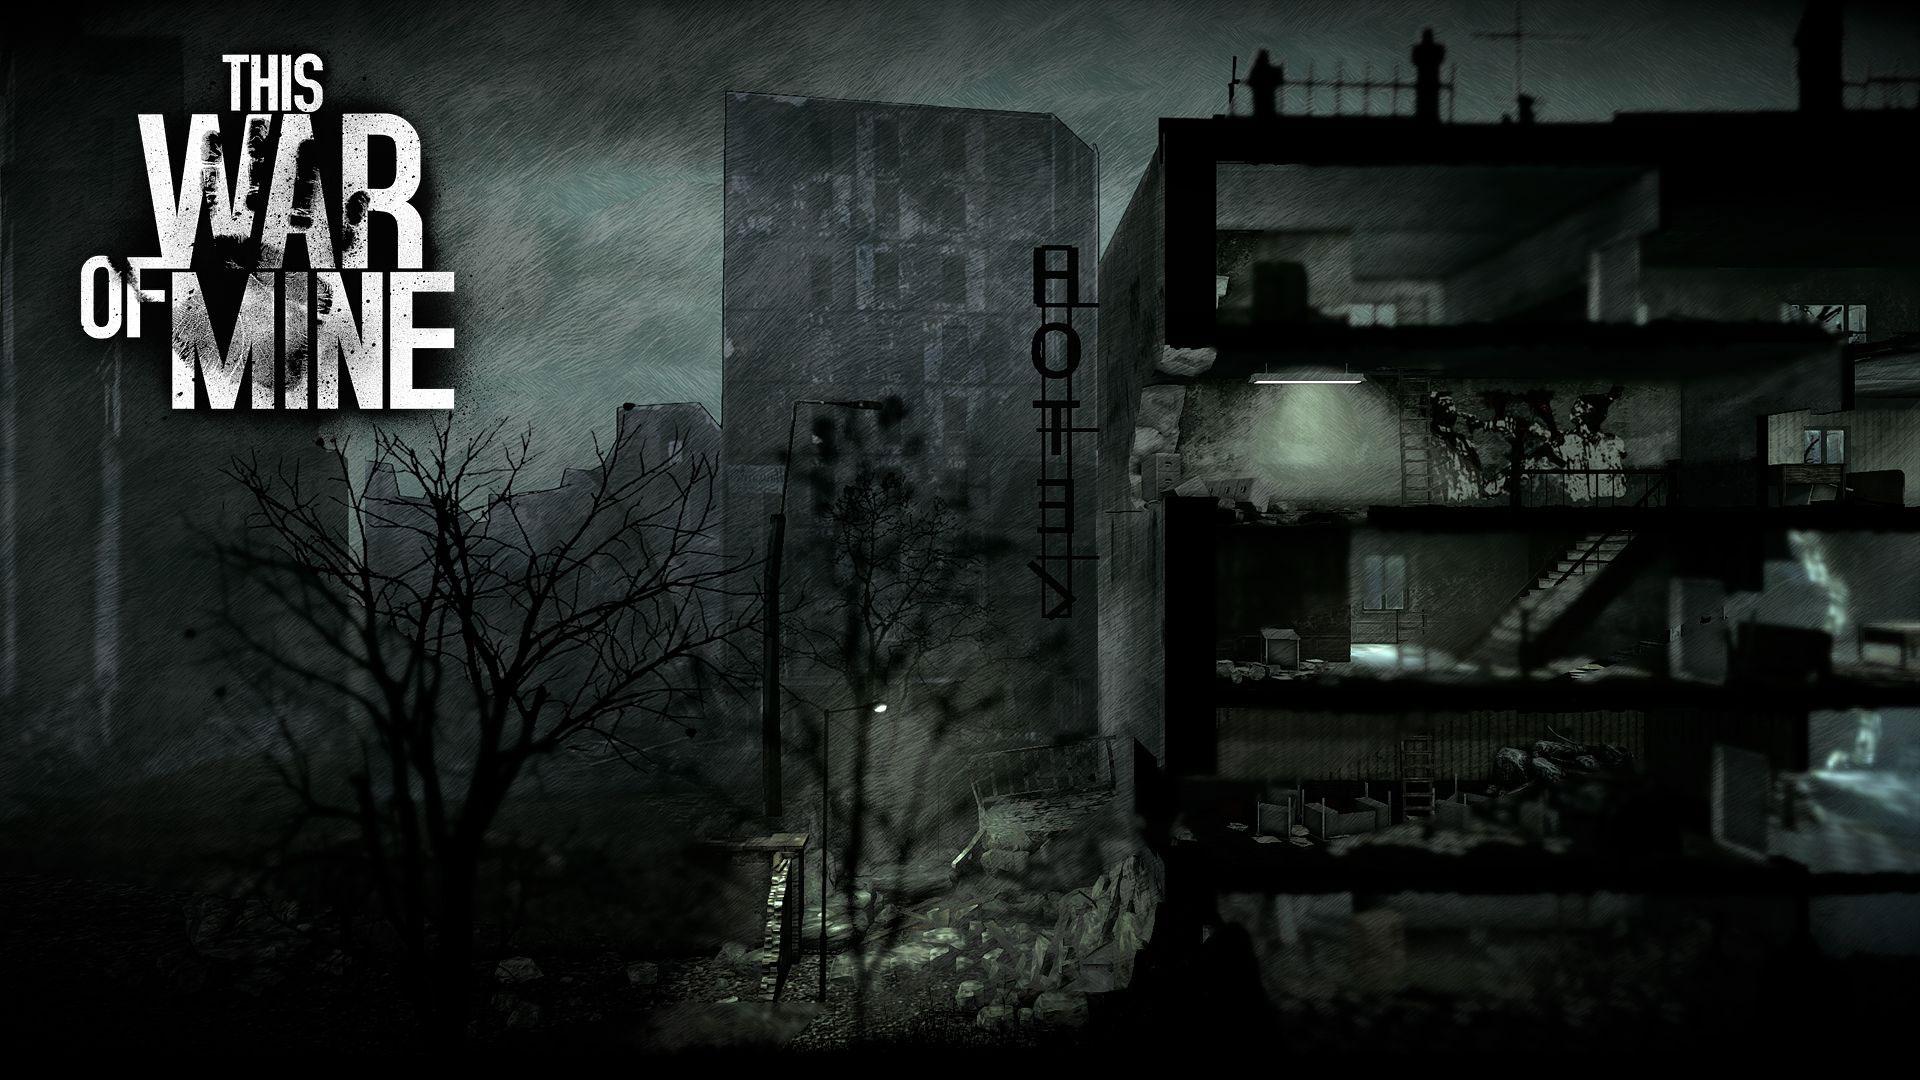 Wallpaper Wallpaper from This War of Mine